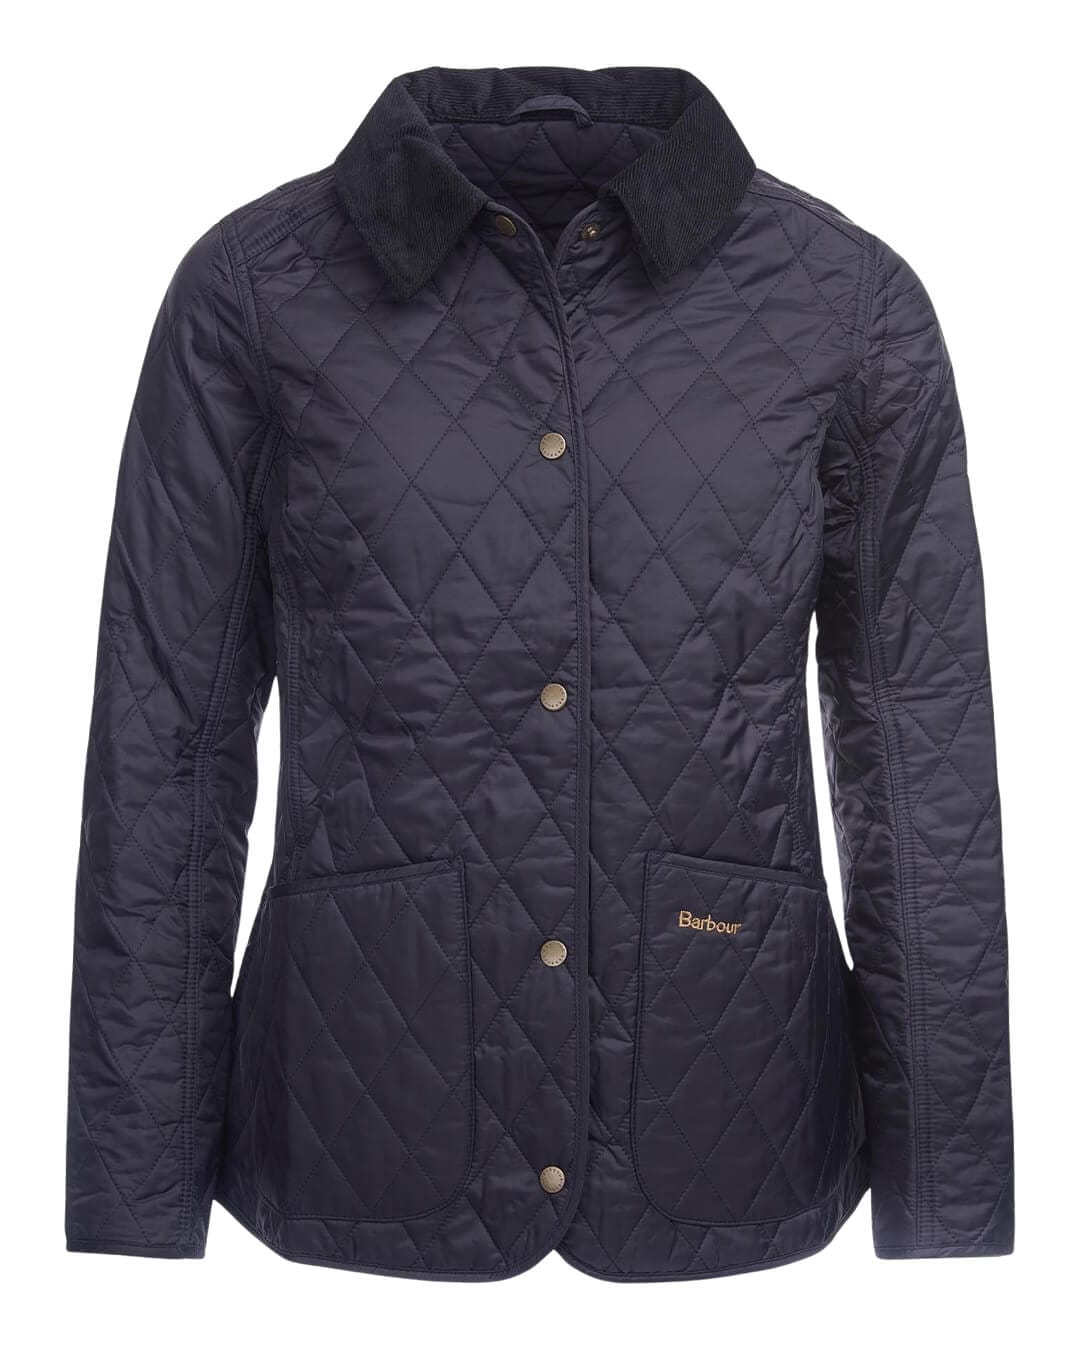 Barbour Outerwear Barbour Annandale Navy Jacket